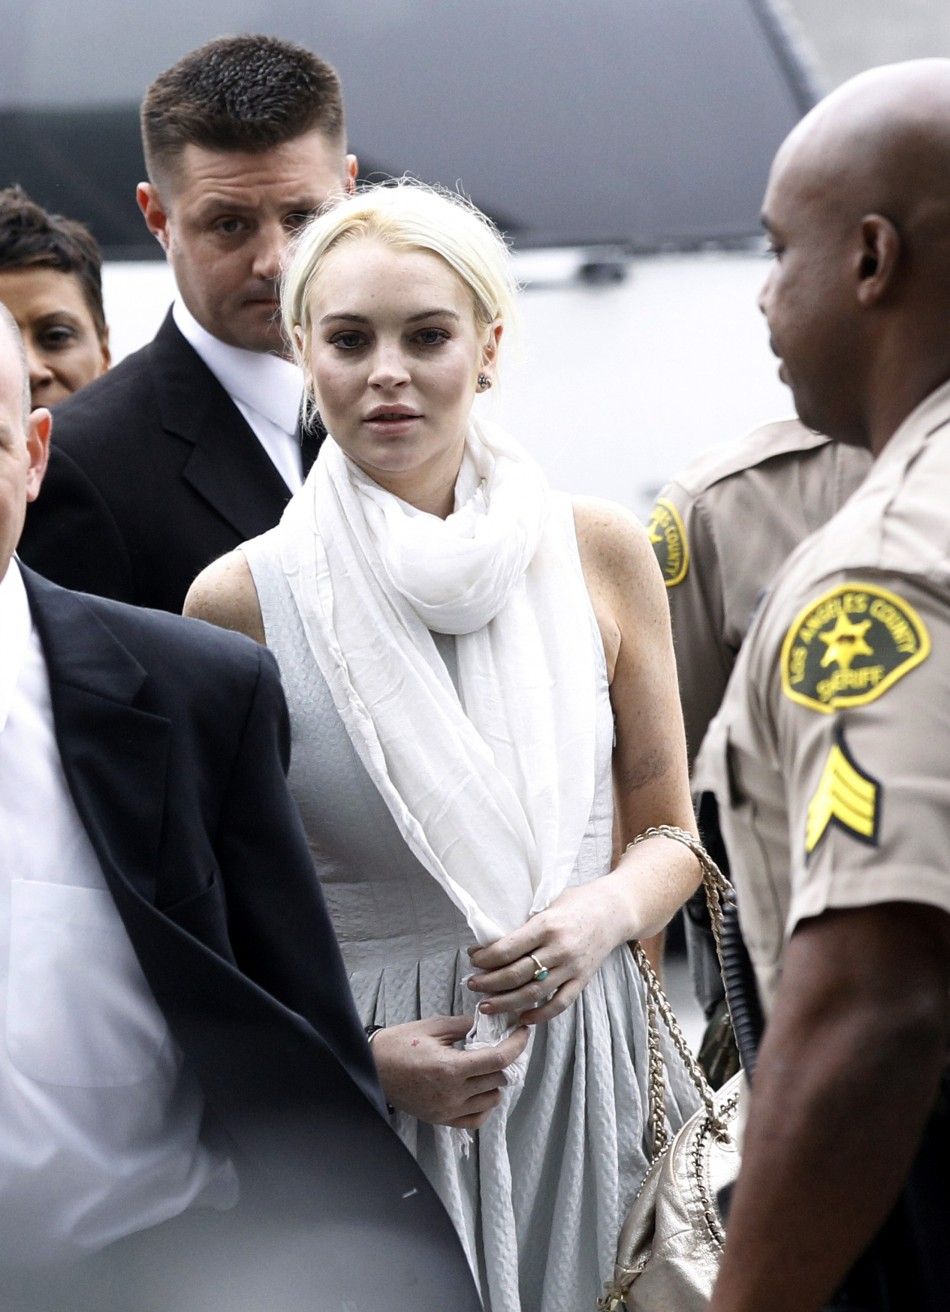 Actress Lindsay Lohan arrives for a progress report hearing at Airport Branch Courthouse in Los Angeles